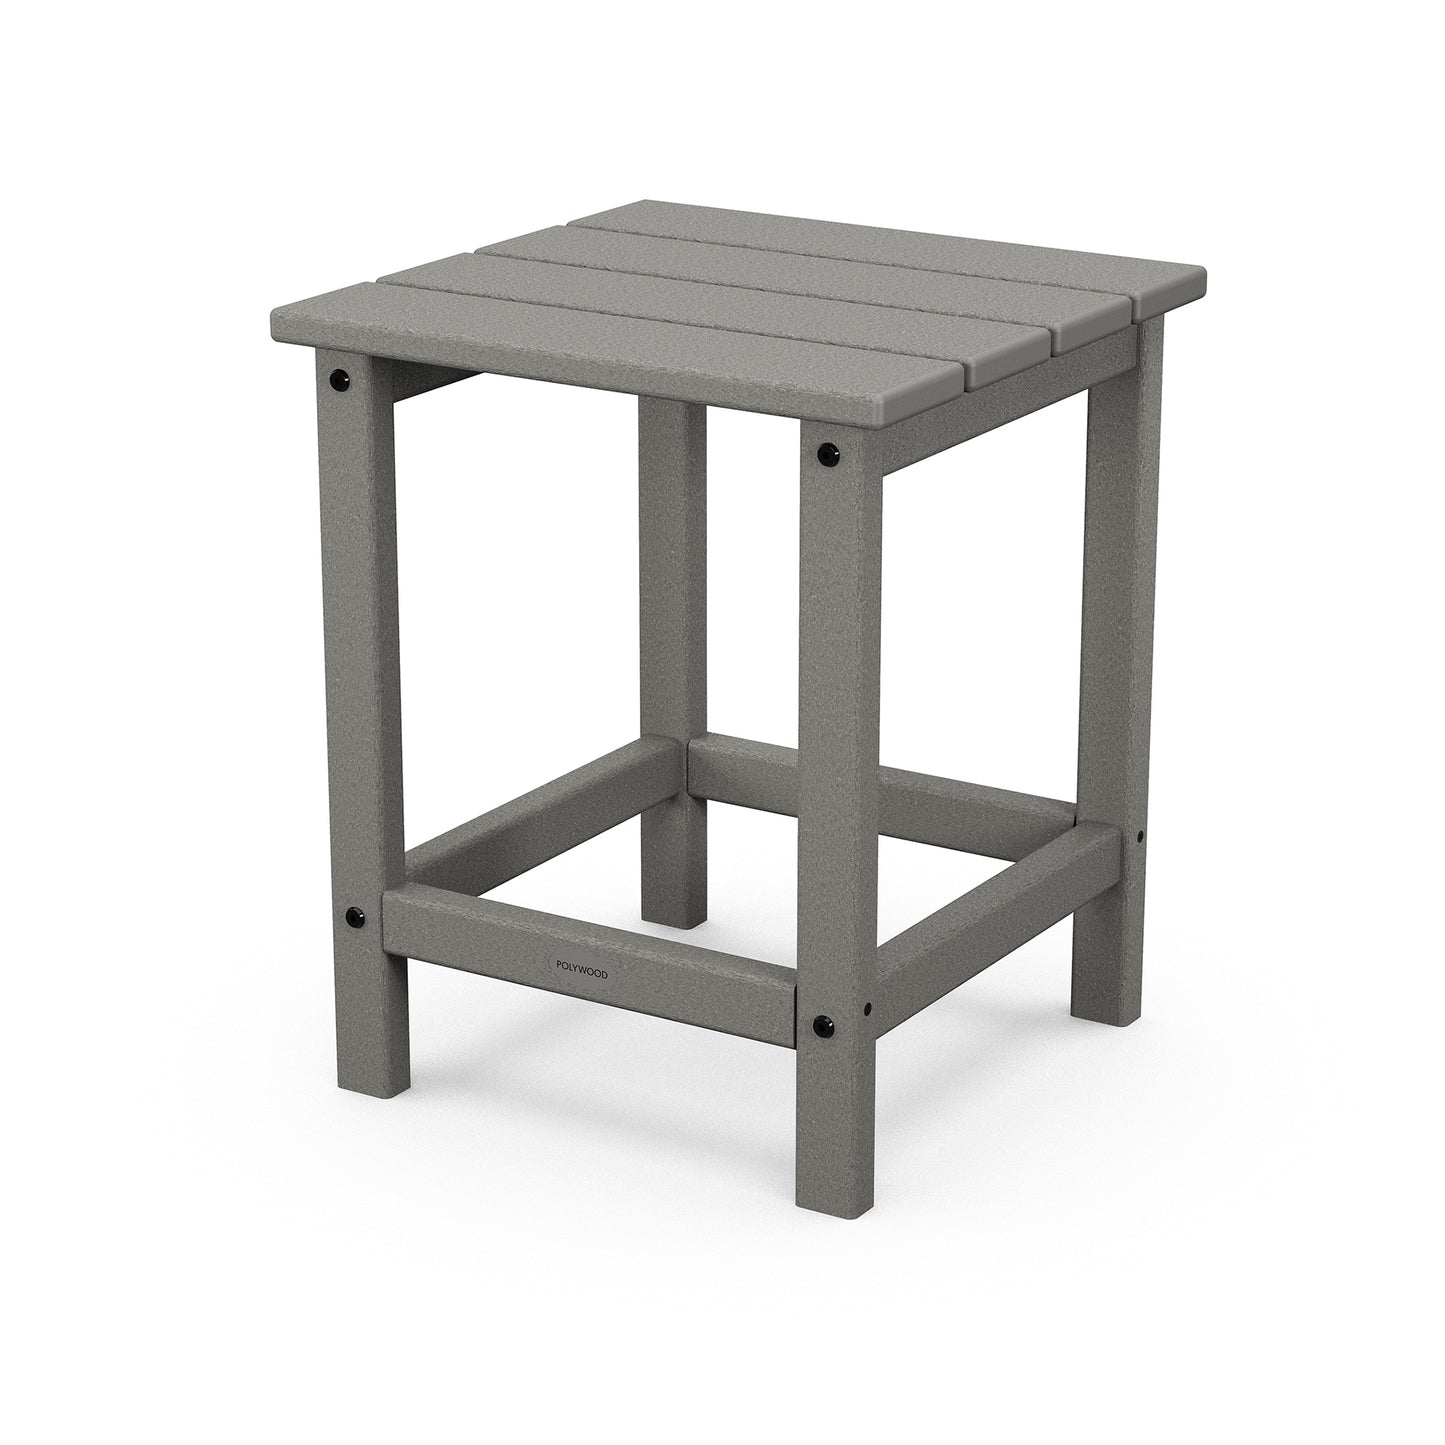 A simple gray POLYWOOD Long Island 18" outdoor side table with a sturdy square top and four legs, positioned on a solid white background. It features visible textures suggesting it's made of durable POLYWOOD®.